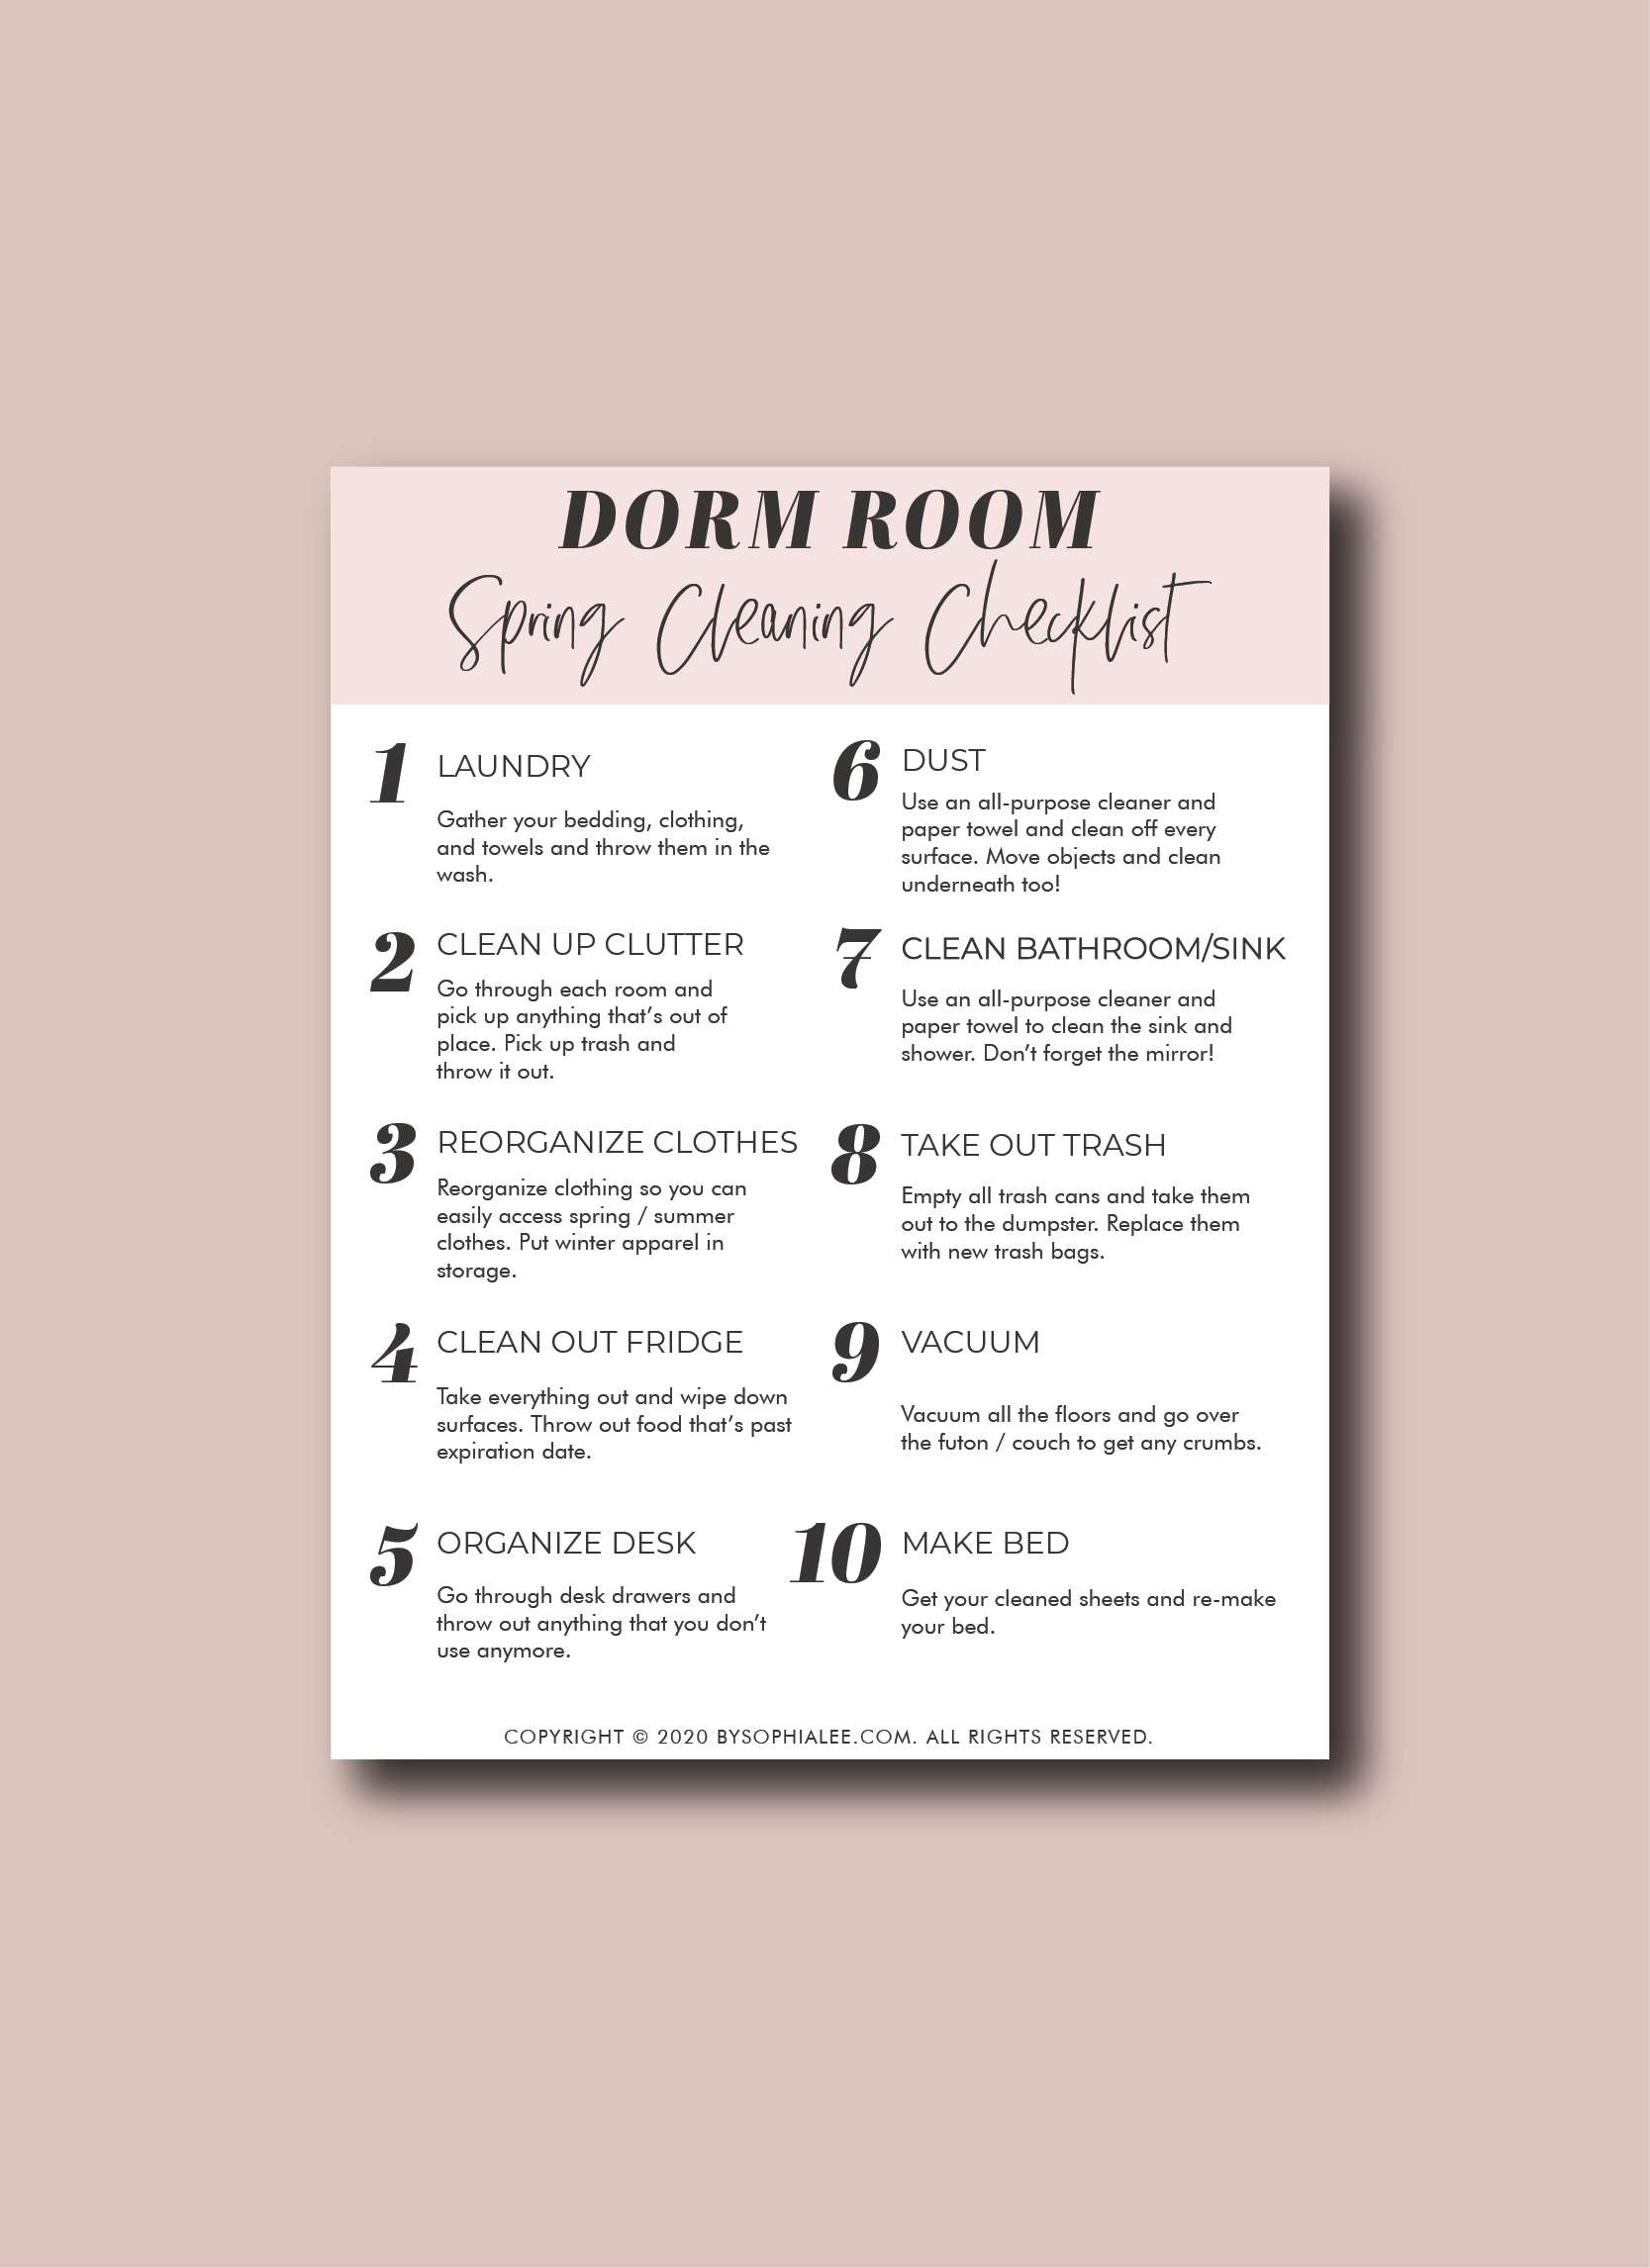 DORM SPRING CLEANING CHECKLIST - By Sophia Lee